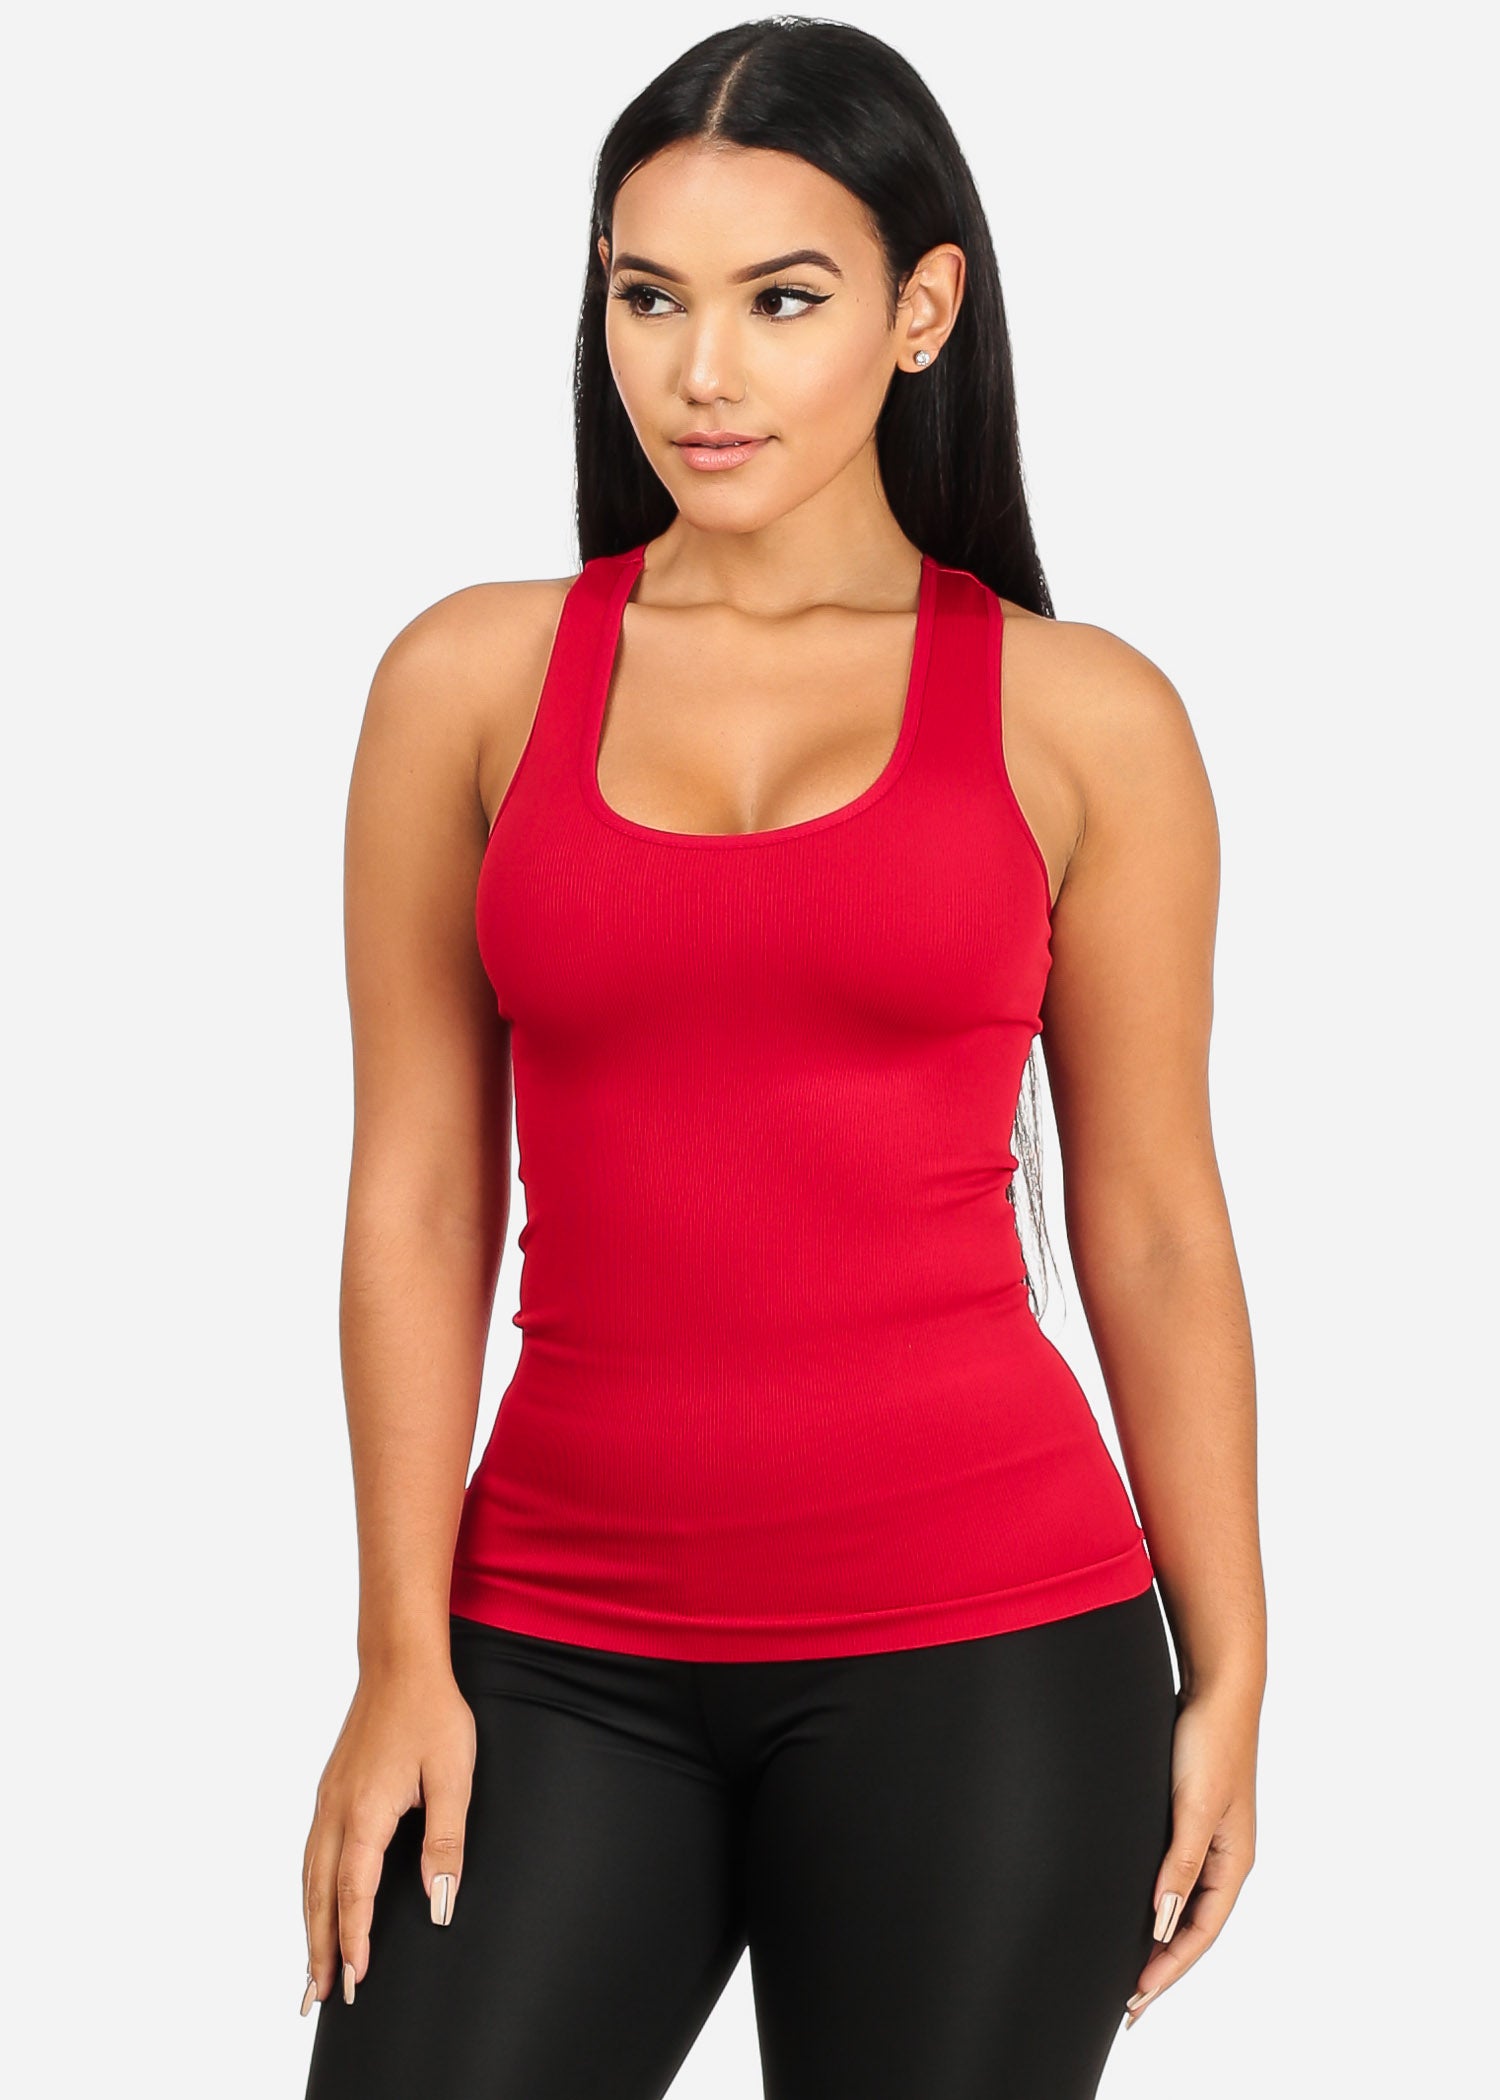 Stretchy Spandex Women's Red Color Tank Top CC-0531 – One Size Fits